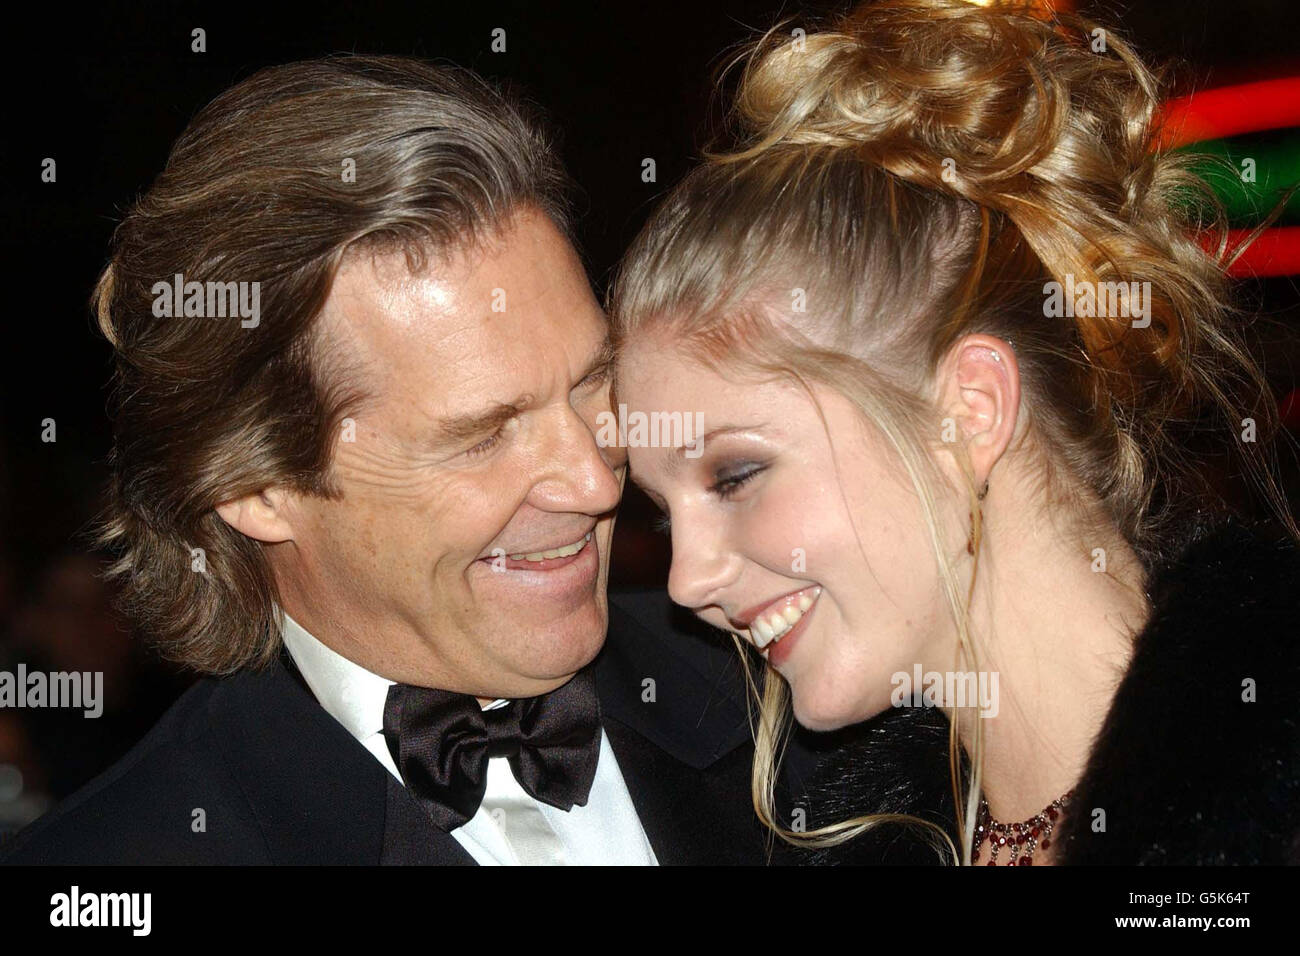 Actor Jeff Bridges accompanied by his daughter Isabelle arrives for the London Film Festival's closing gala premiere of his new film K-Pax at the Empire in Leicester Square, London. * ..... The film follows the story of a mysterious hospital patient who claims to be from another planet. lllll Stock Photo